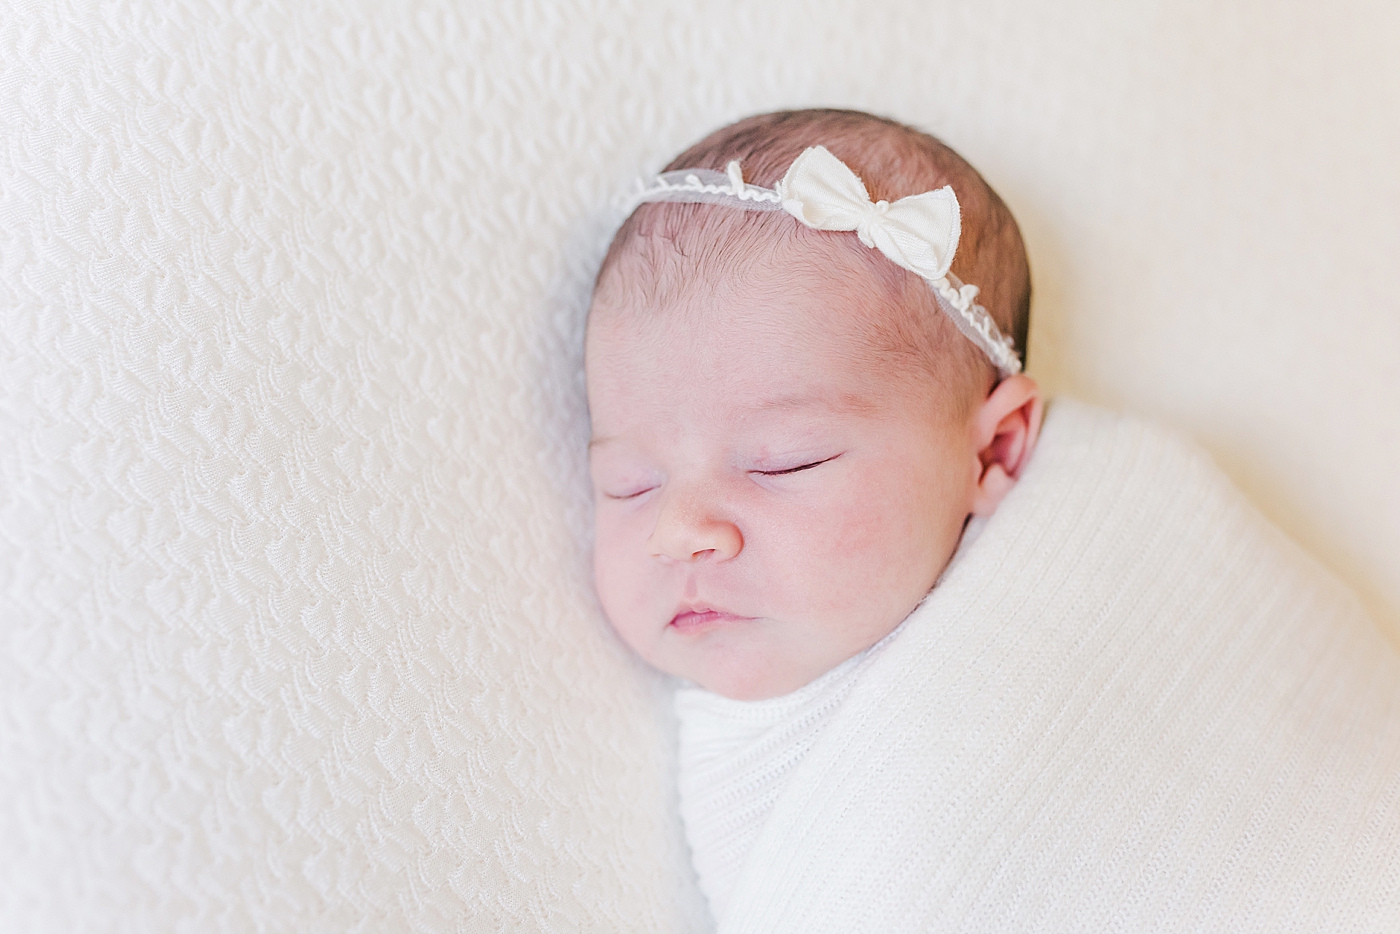 Sleeping baby girl with a headband wrapped in a swaddle | Photo by Ballantyne newborn photographer Anna Wisjo 